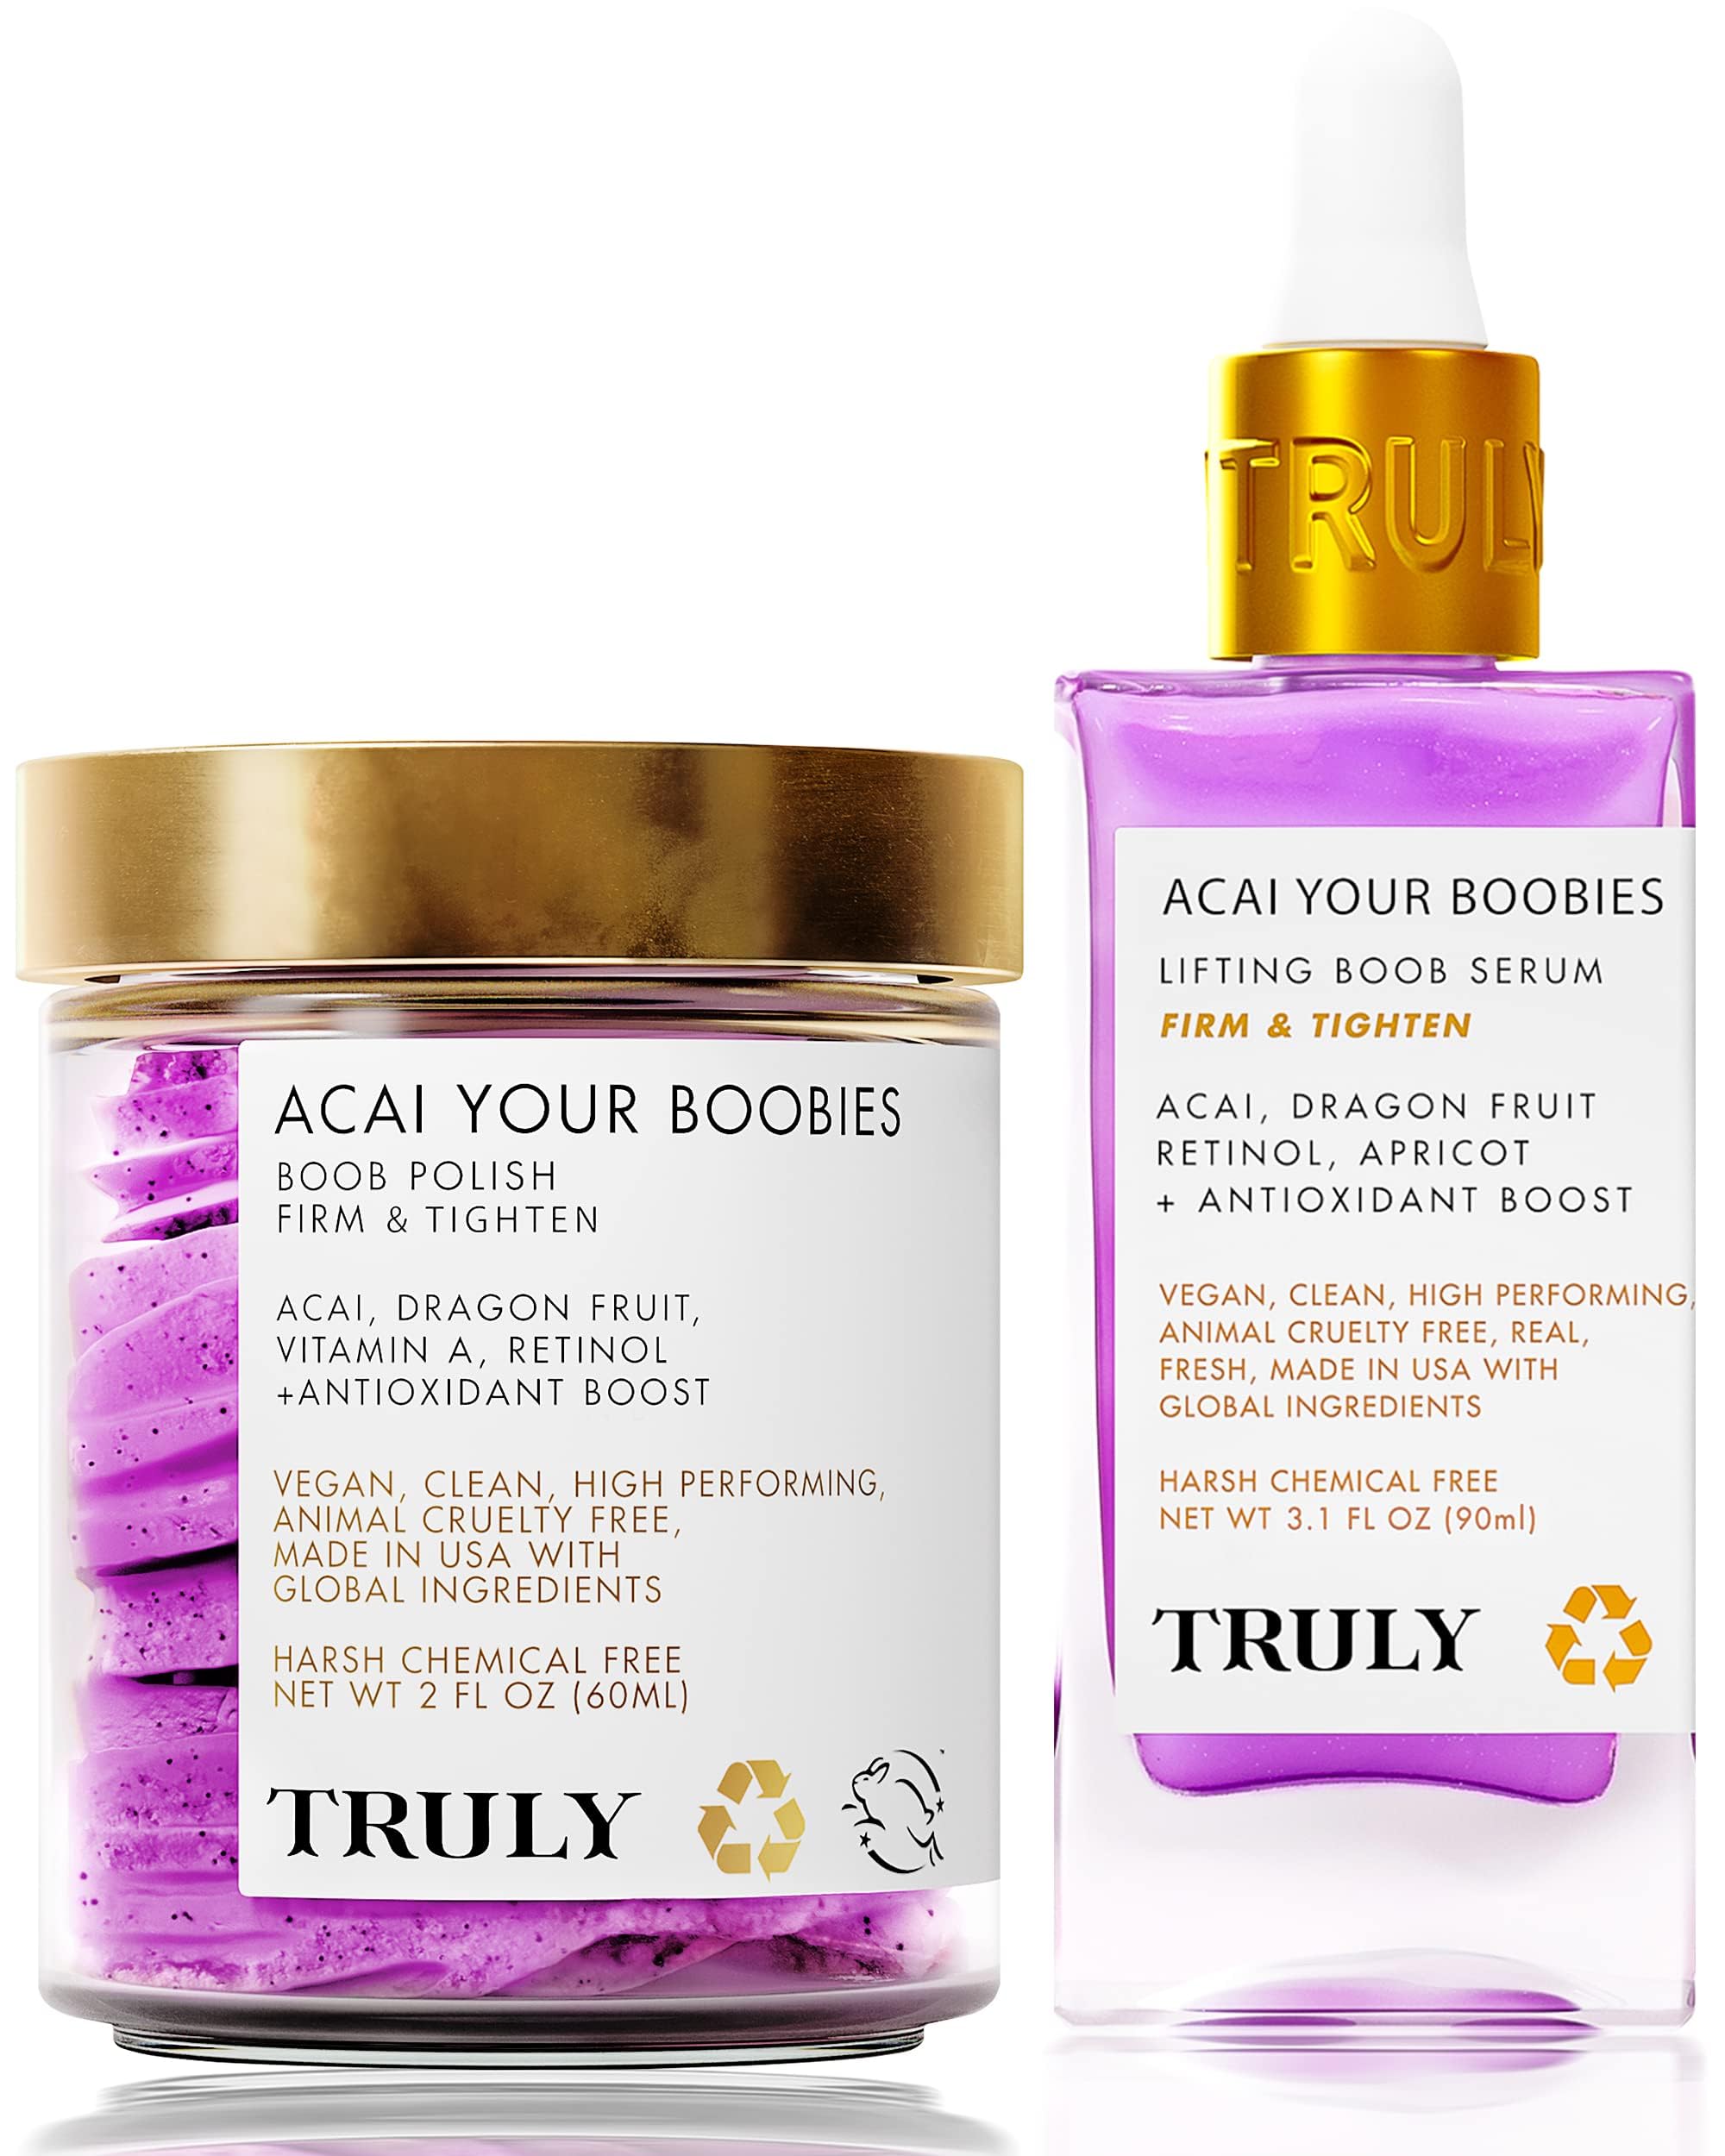 billy backer recommends Truly Acai Your Boobies